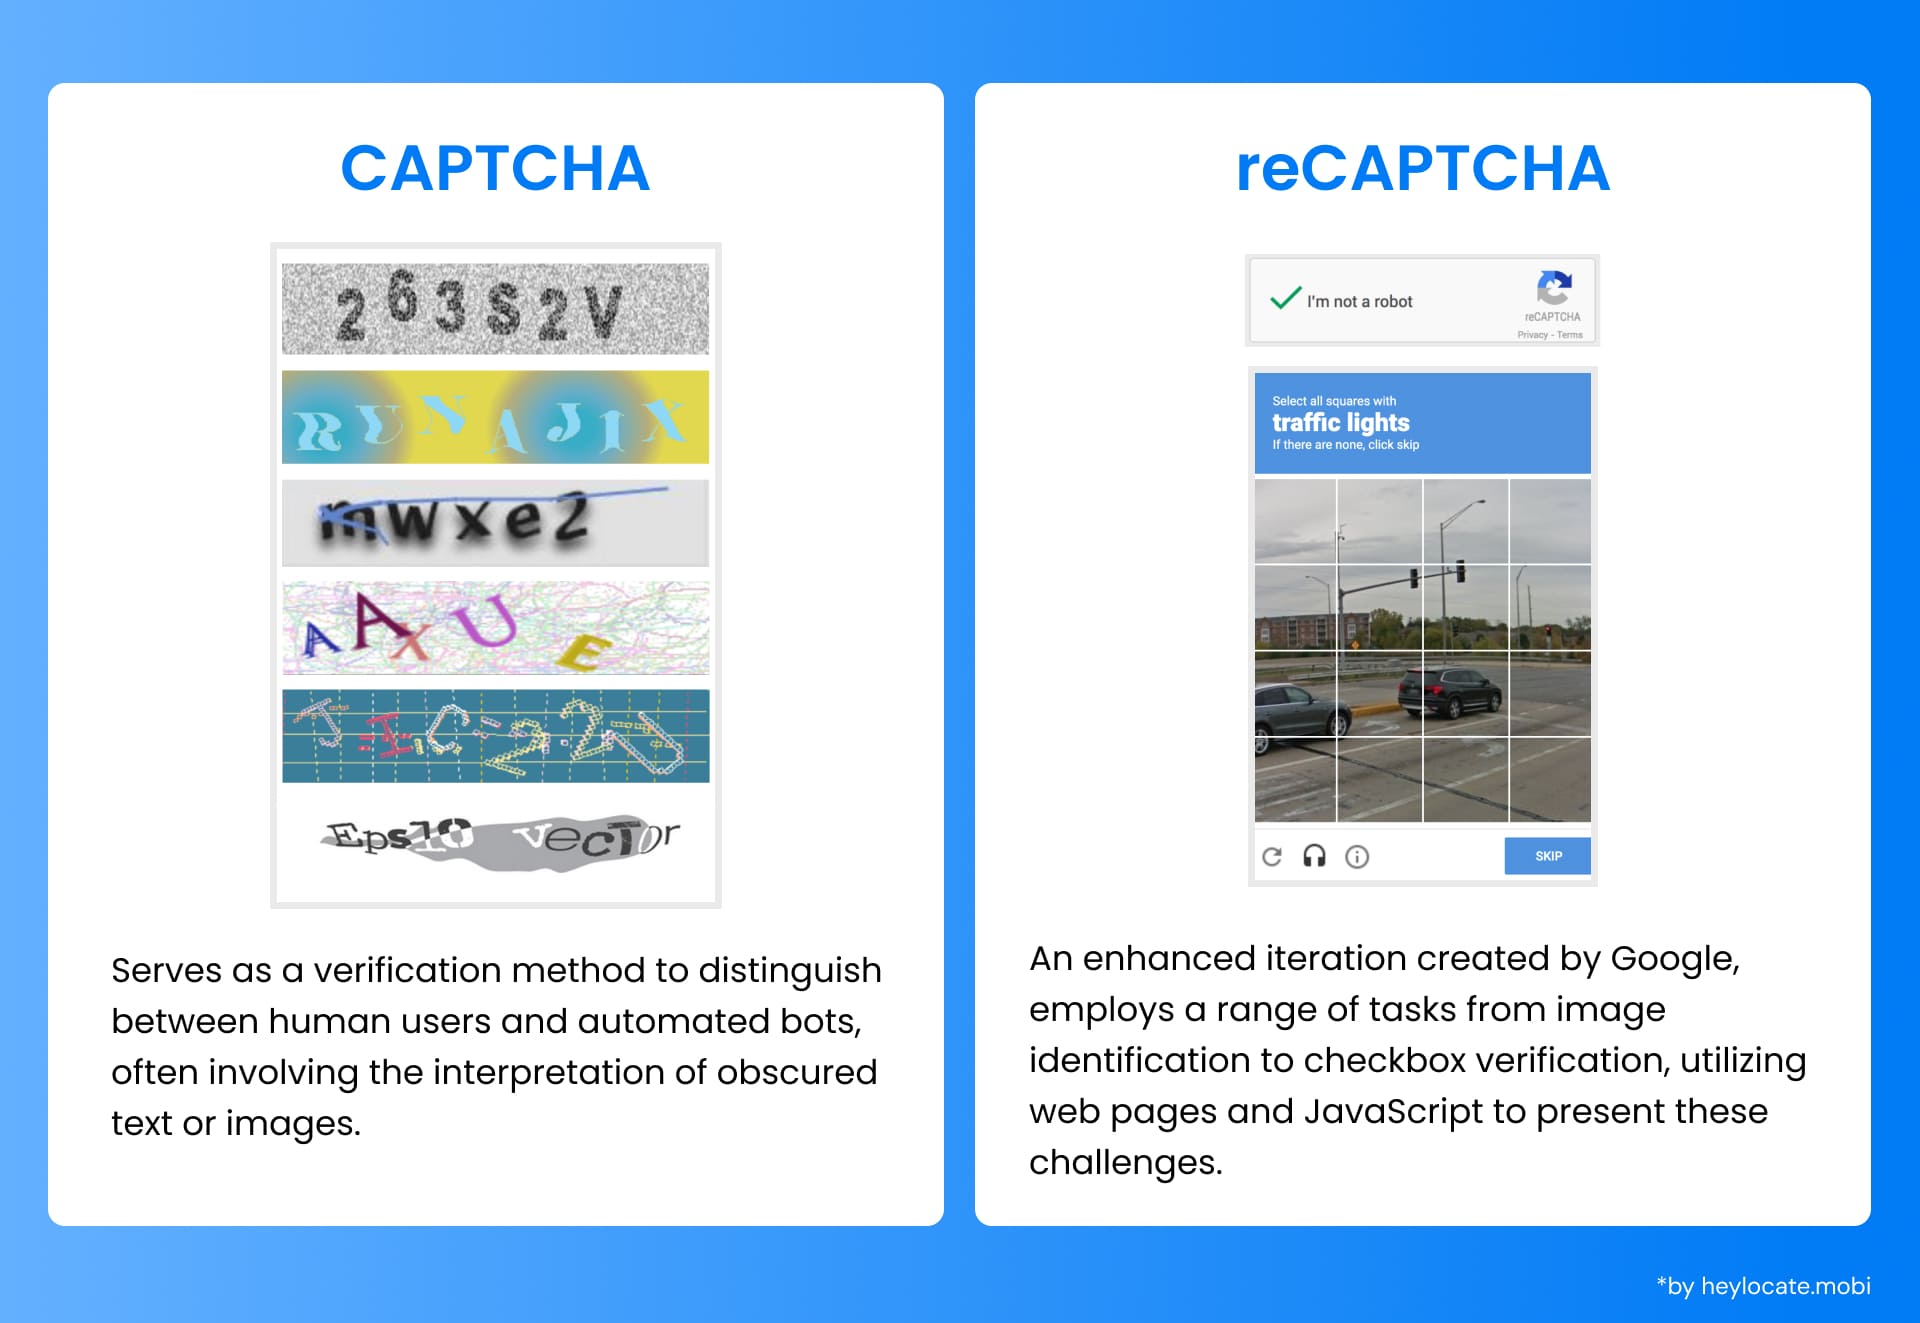 An image of two types of Internet security checks: On the left is CAPTCHA, which uses garbled text to verify a user to distinguish a human from a bot. On the right is reCAPTCHA, a more advanced version from Google that includes tasks such as image recognition and checking checkboxes to make sure the user isn't a robot